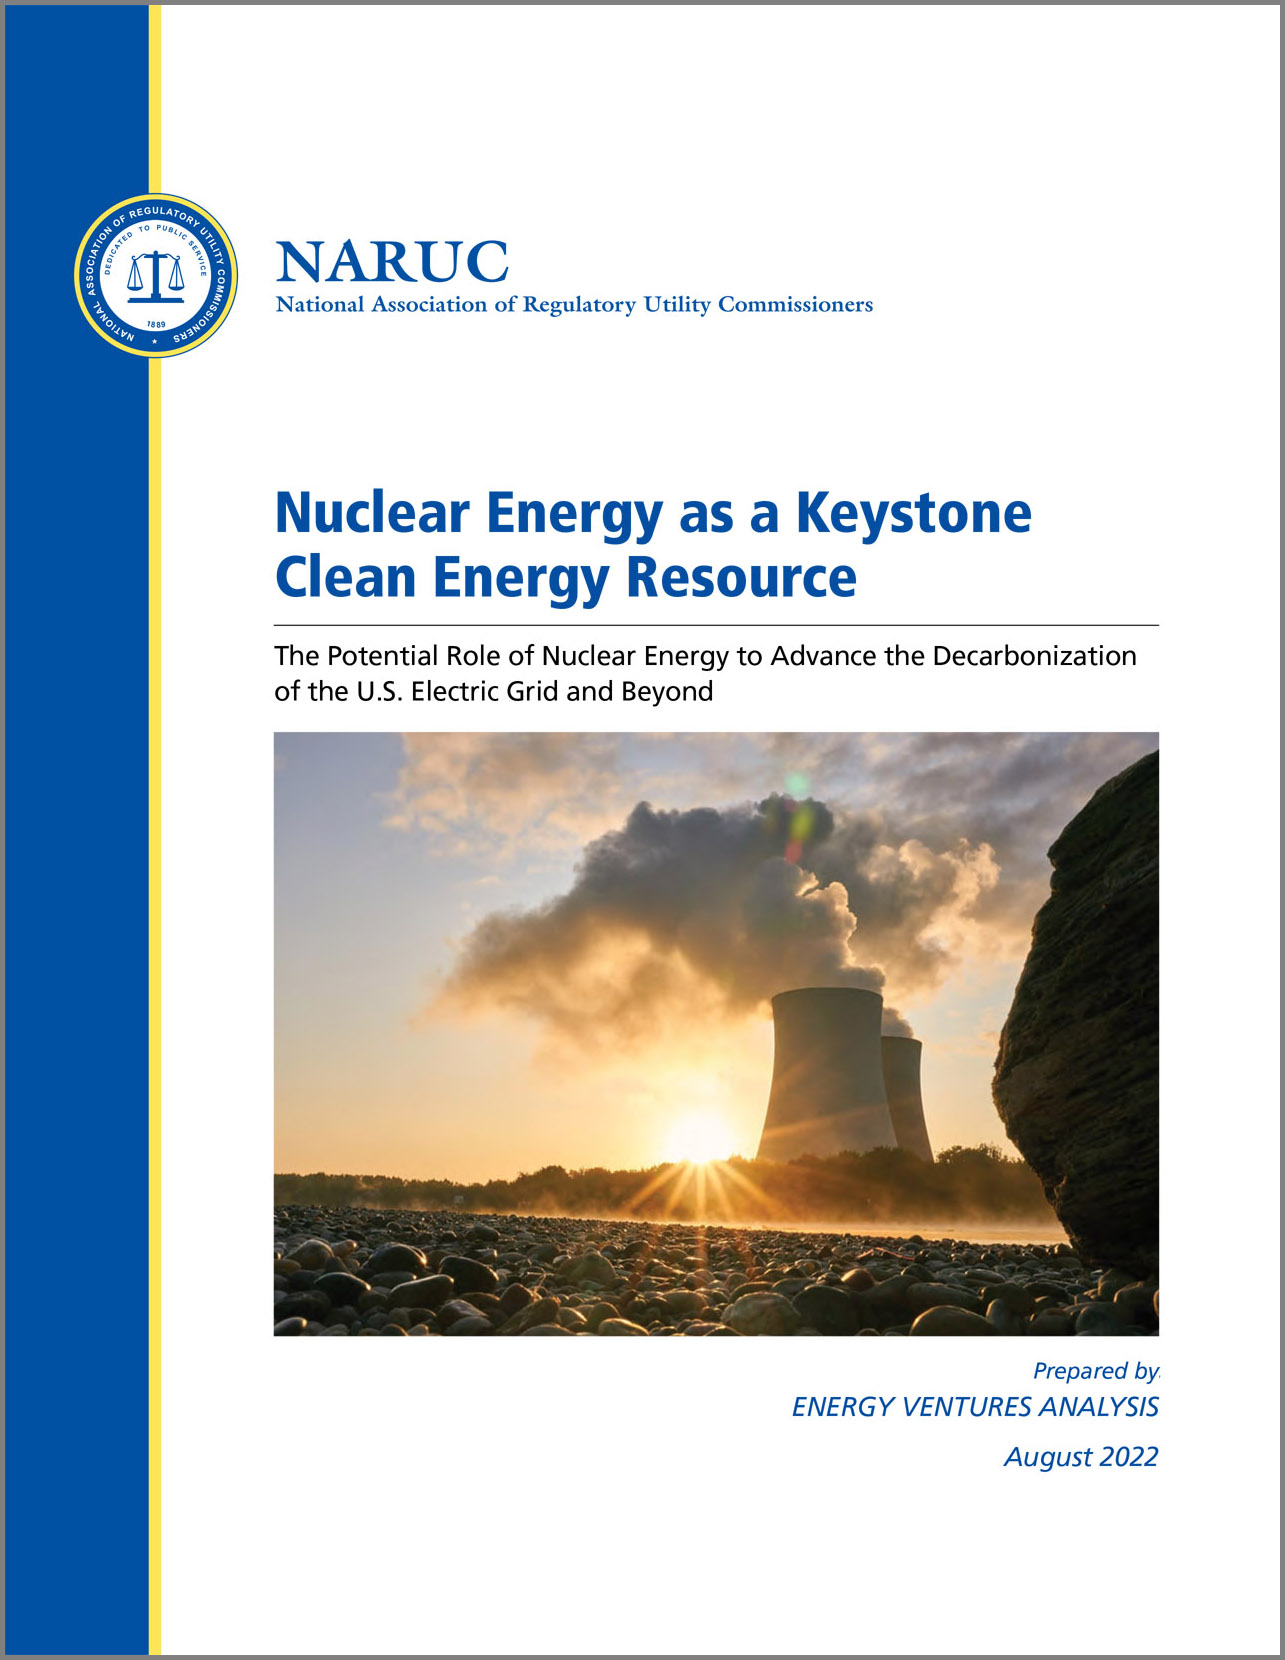 NARUC white paper examines nuclear's role in advancing